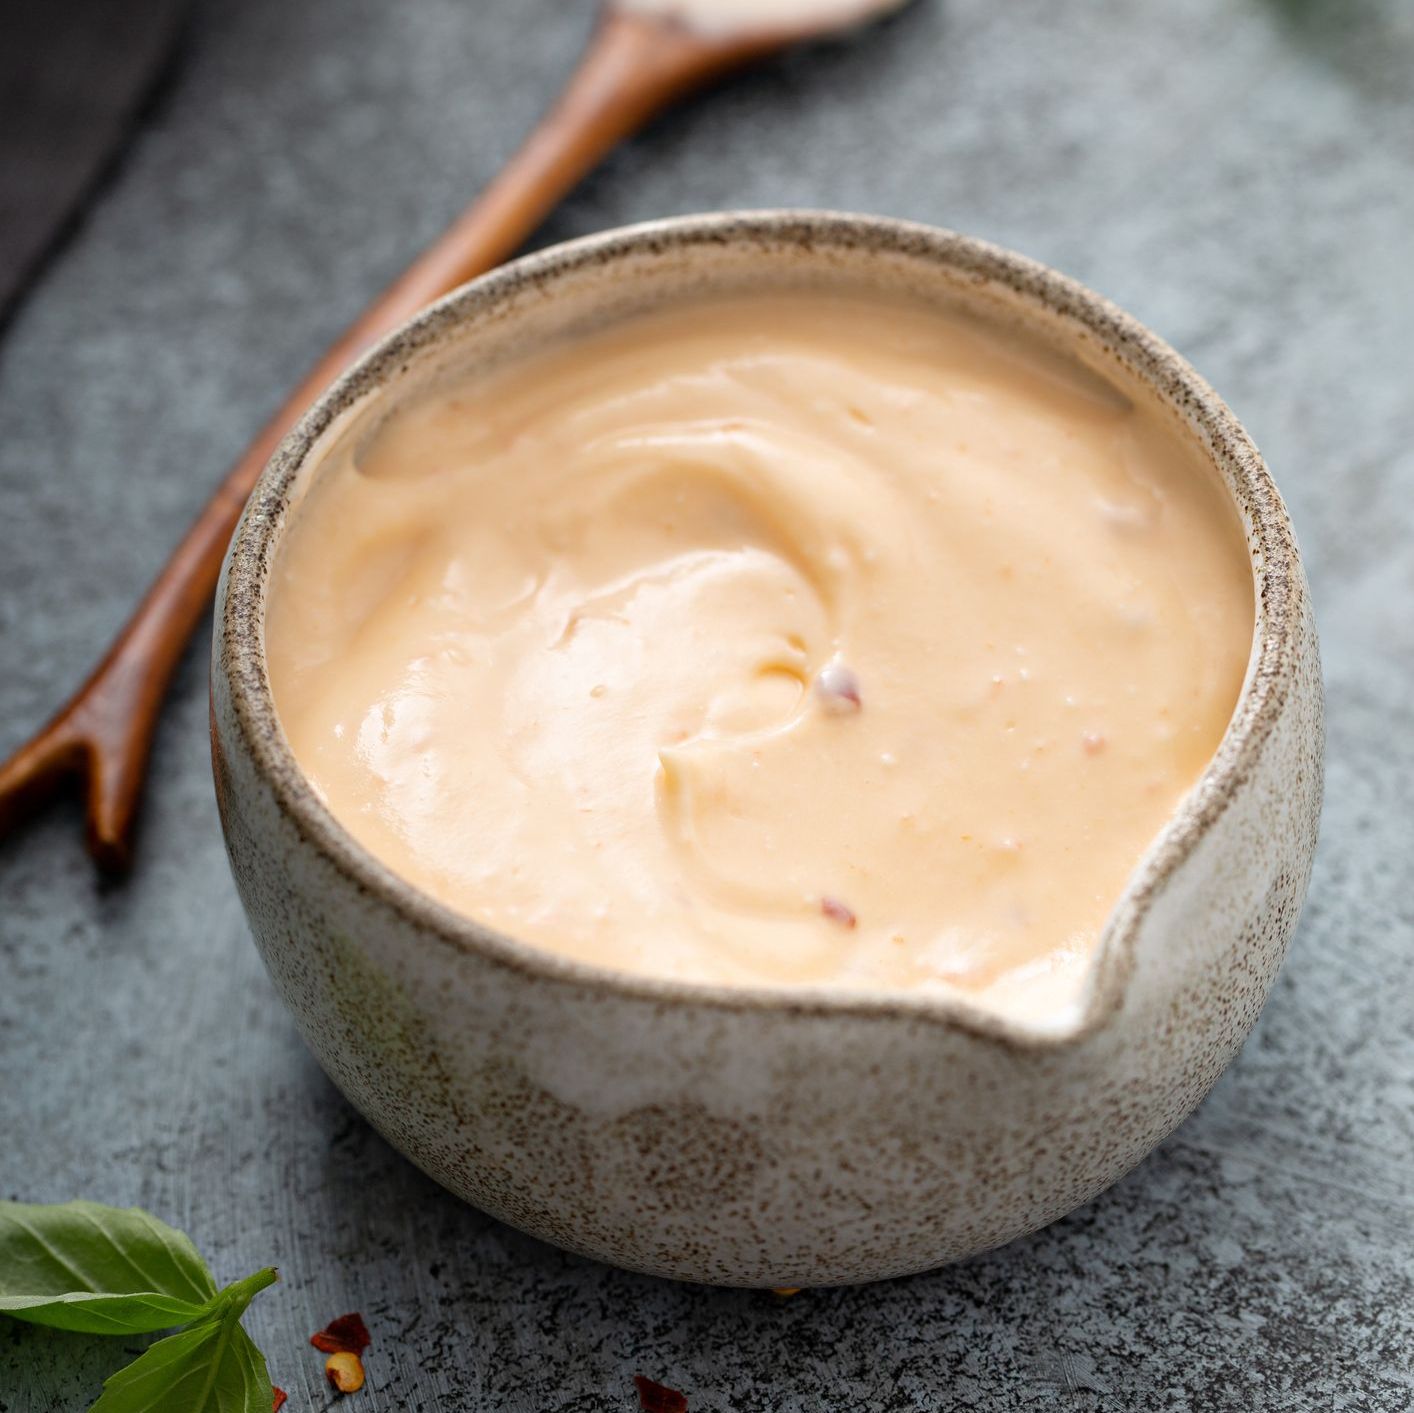 Homemade creamy dressing/sauce. Light orange-pink in a gray ceramic sauce bowl, accompanied by wooden spoon on a dark gray surface with herbs and chili flakes.